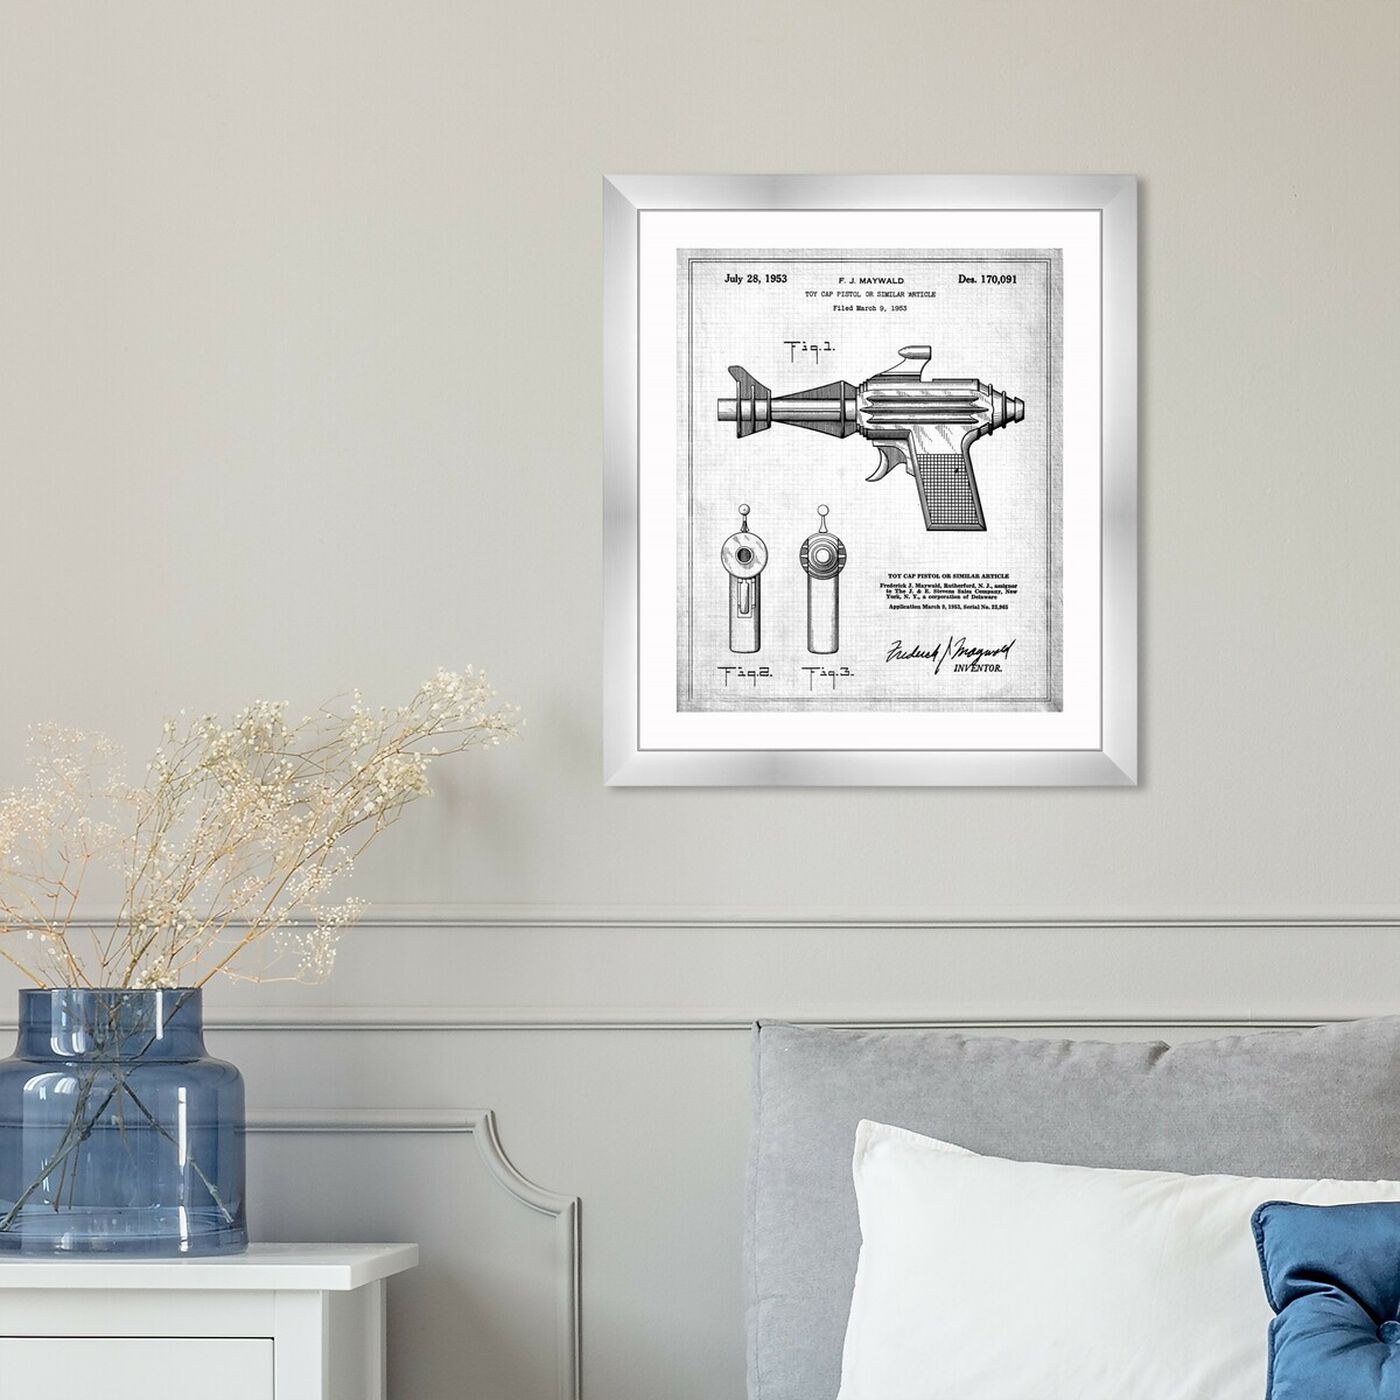 Hanging view of Toy Cap Pistol 1953 featuring entertainment and hobbies and machine guns art.